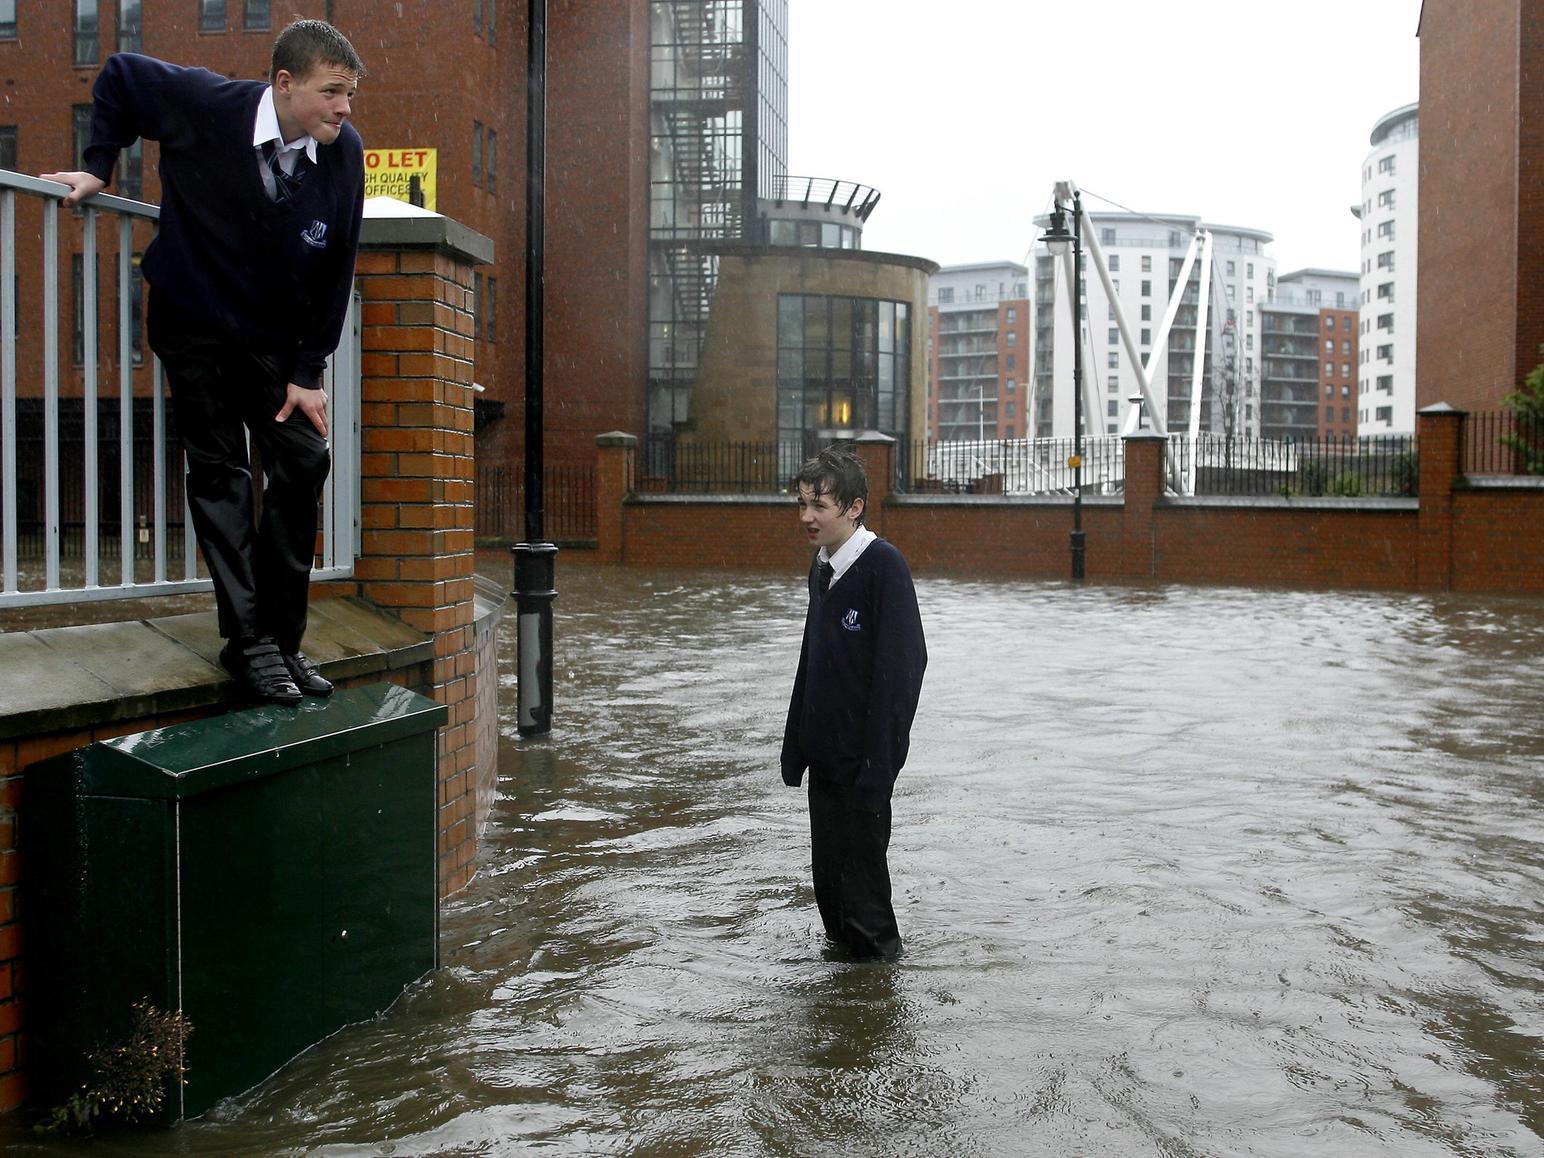 Schoolchildren run through flood waters after the banks of the River Aire in Leeds city centre were broken by heavy rain.